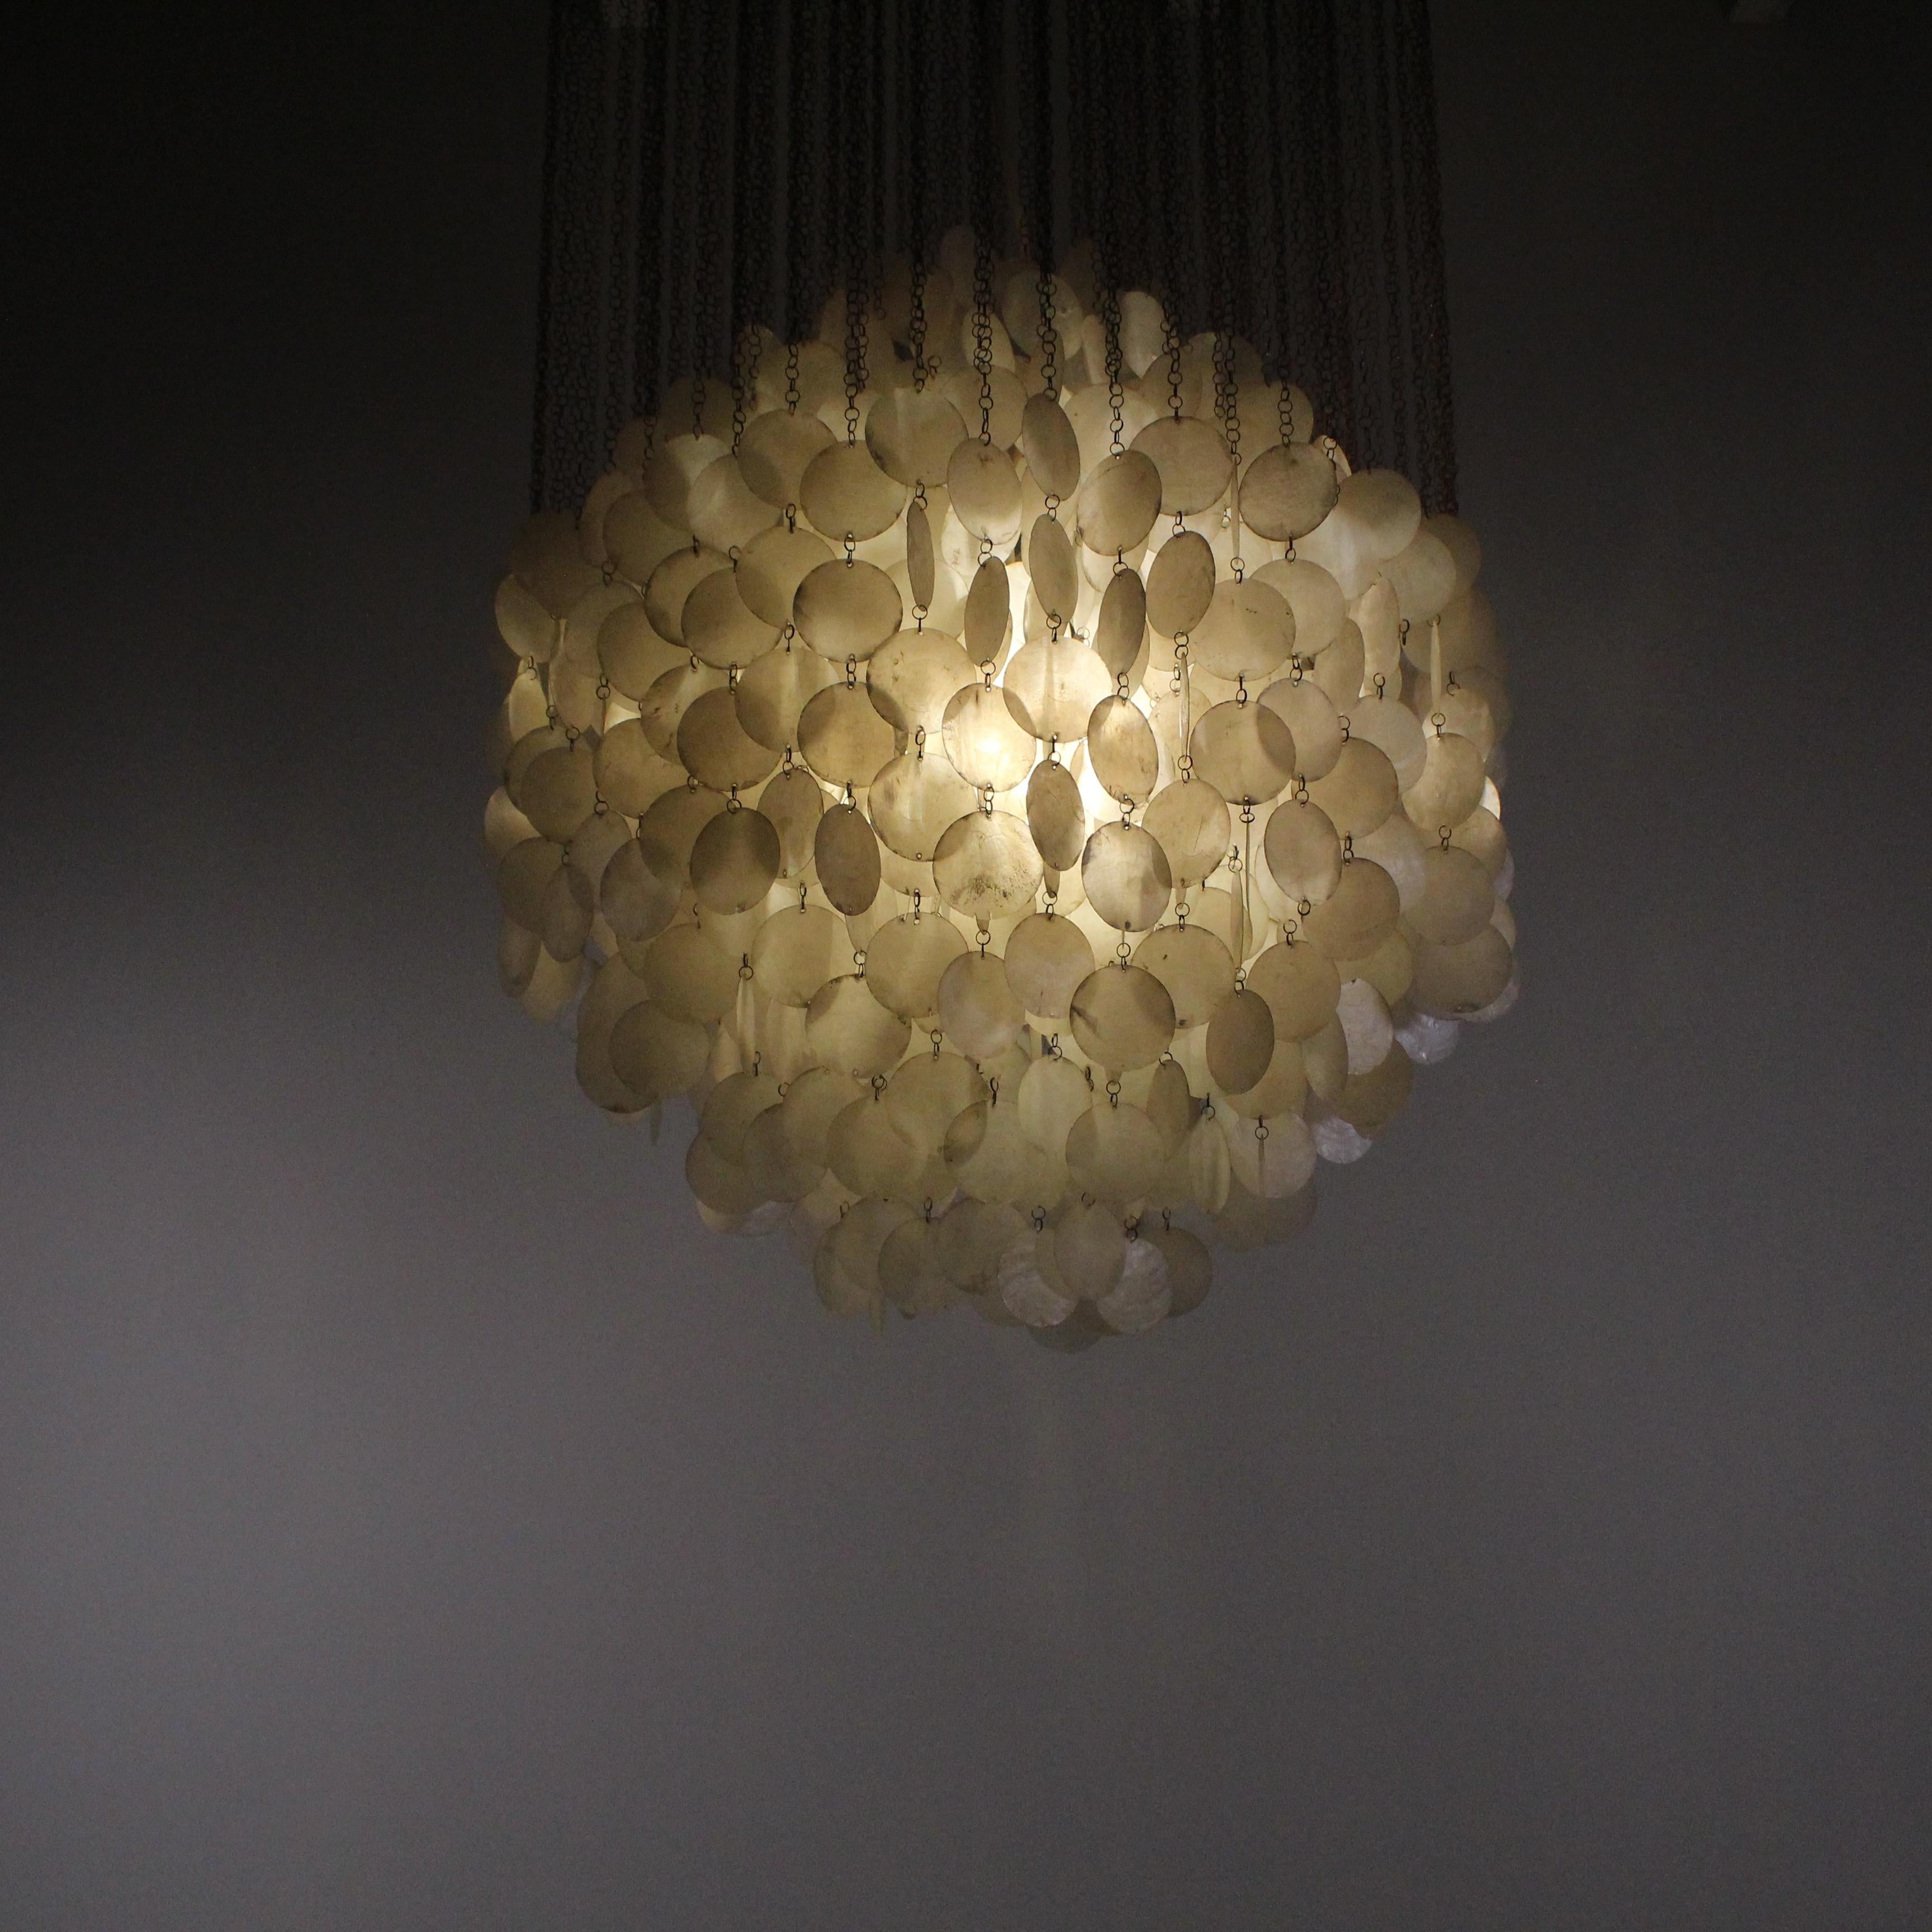 This meticulously crafted chandelier is a testament to Panton's iconic design ethos. The cascading layers of seashells create a dynamic interplay of light and shadow, delivering a striking visual impact. This chandelier transcends traditional